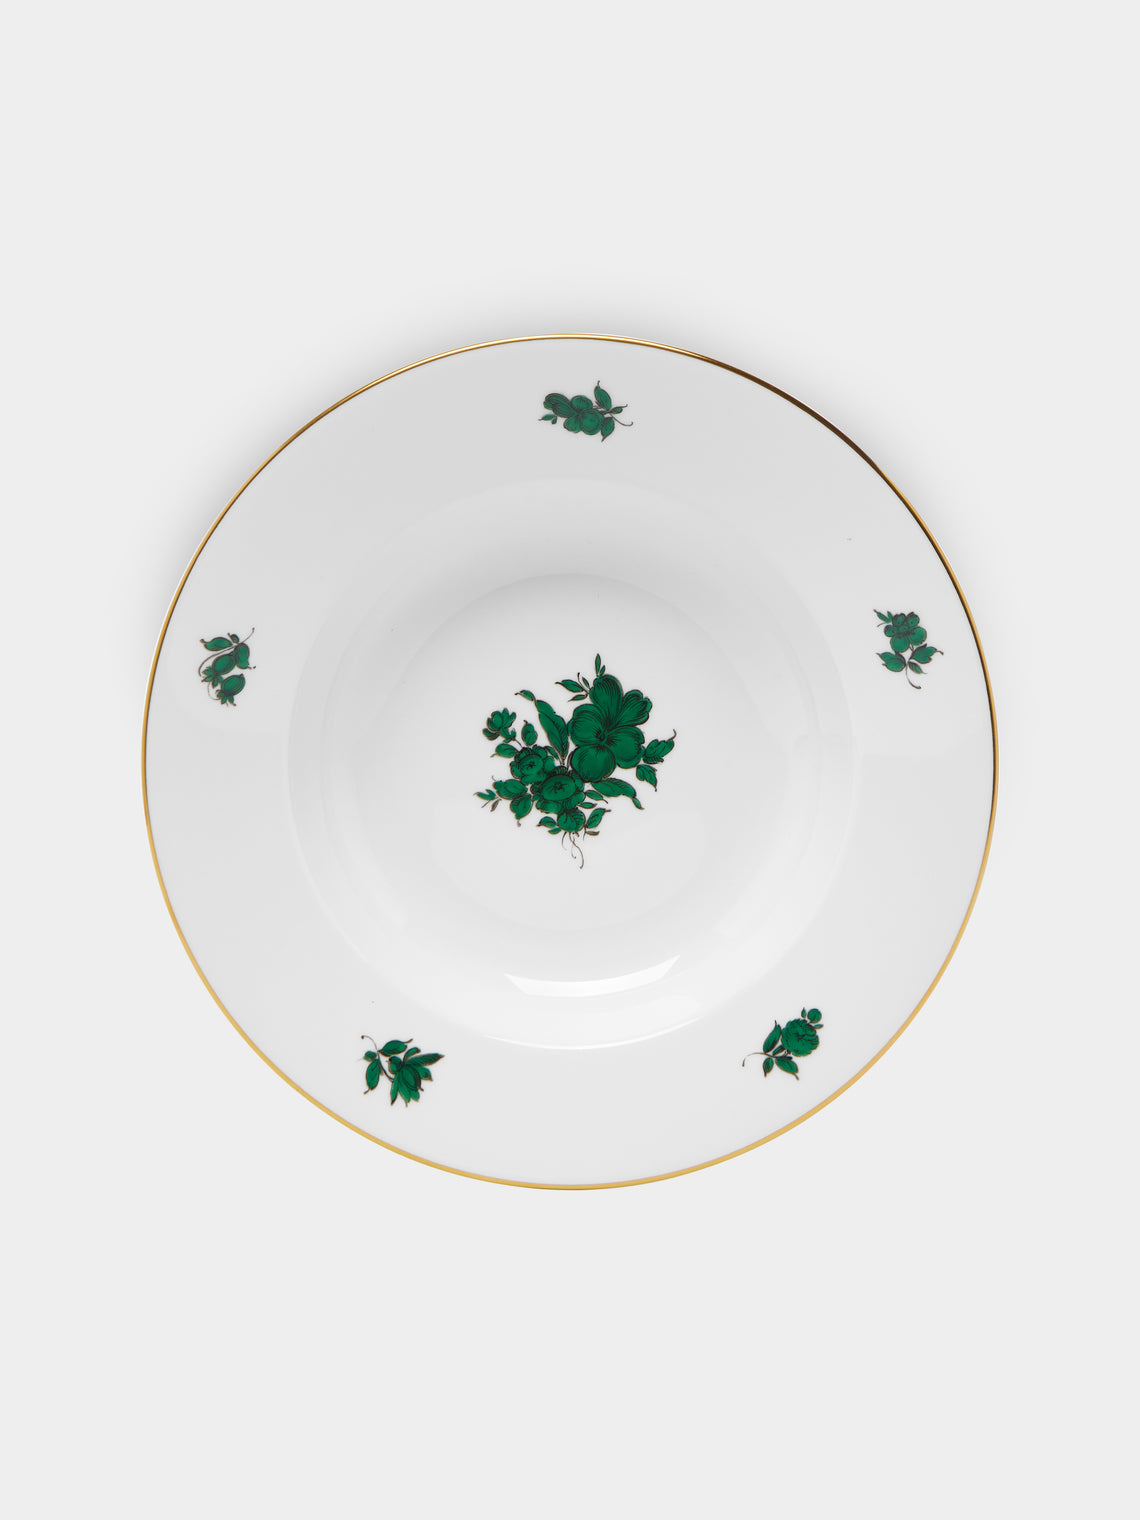 Augarten - Maria Theresia Hand-Painted Porcelain Soup Plate -  - ABASK - 